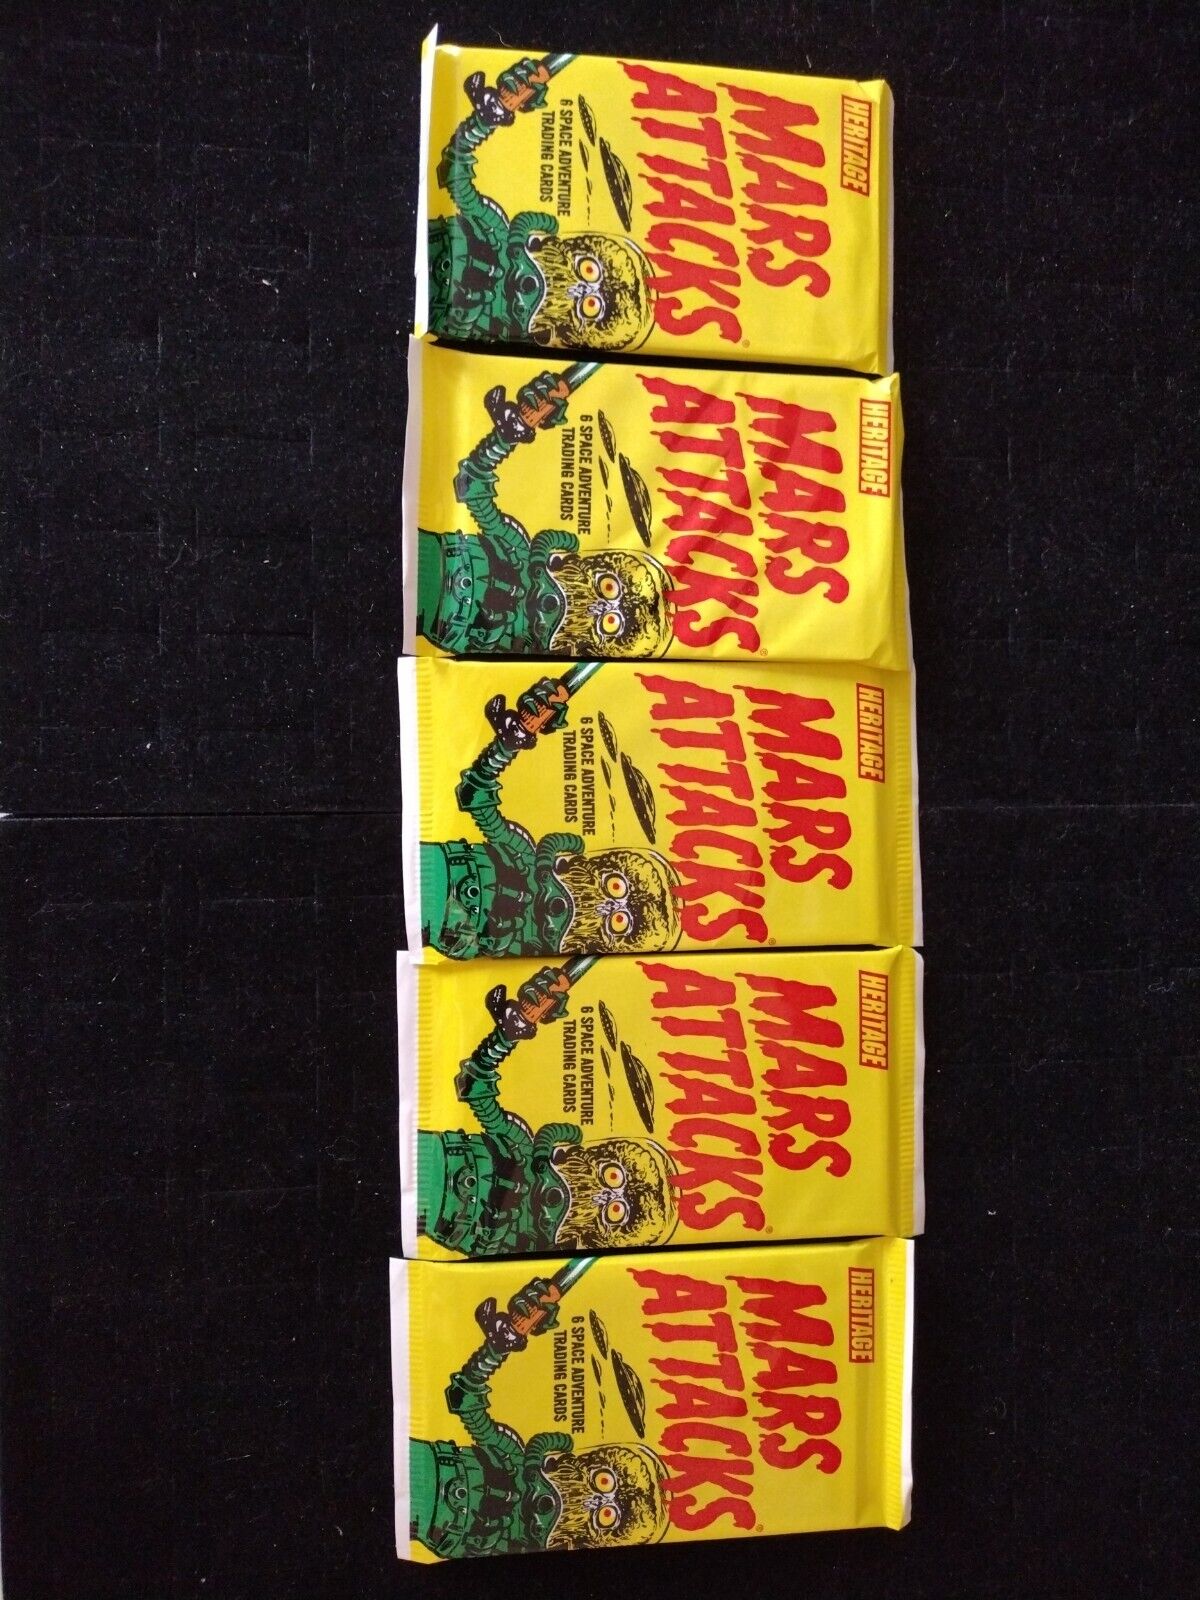 TOPPS HERITAGE MARS ATTACKS CARDS - 5 NEW SEALED PACKS - 2012 